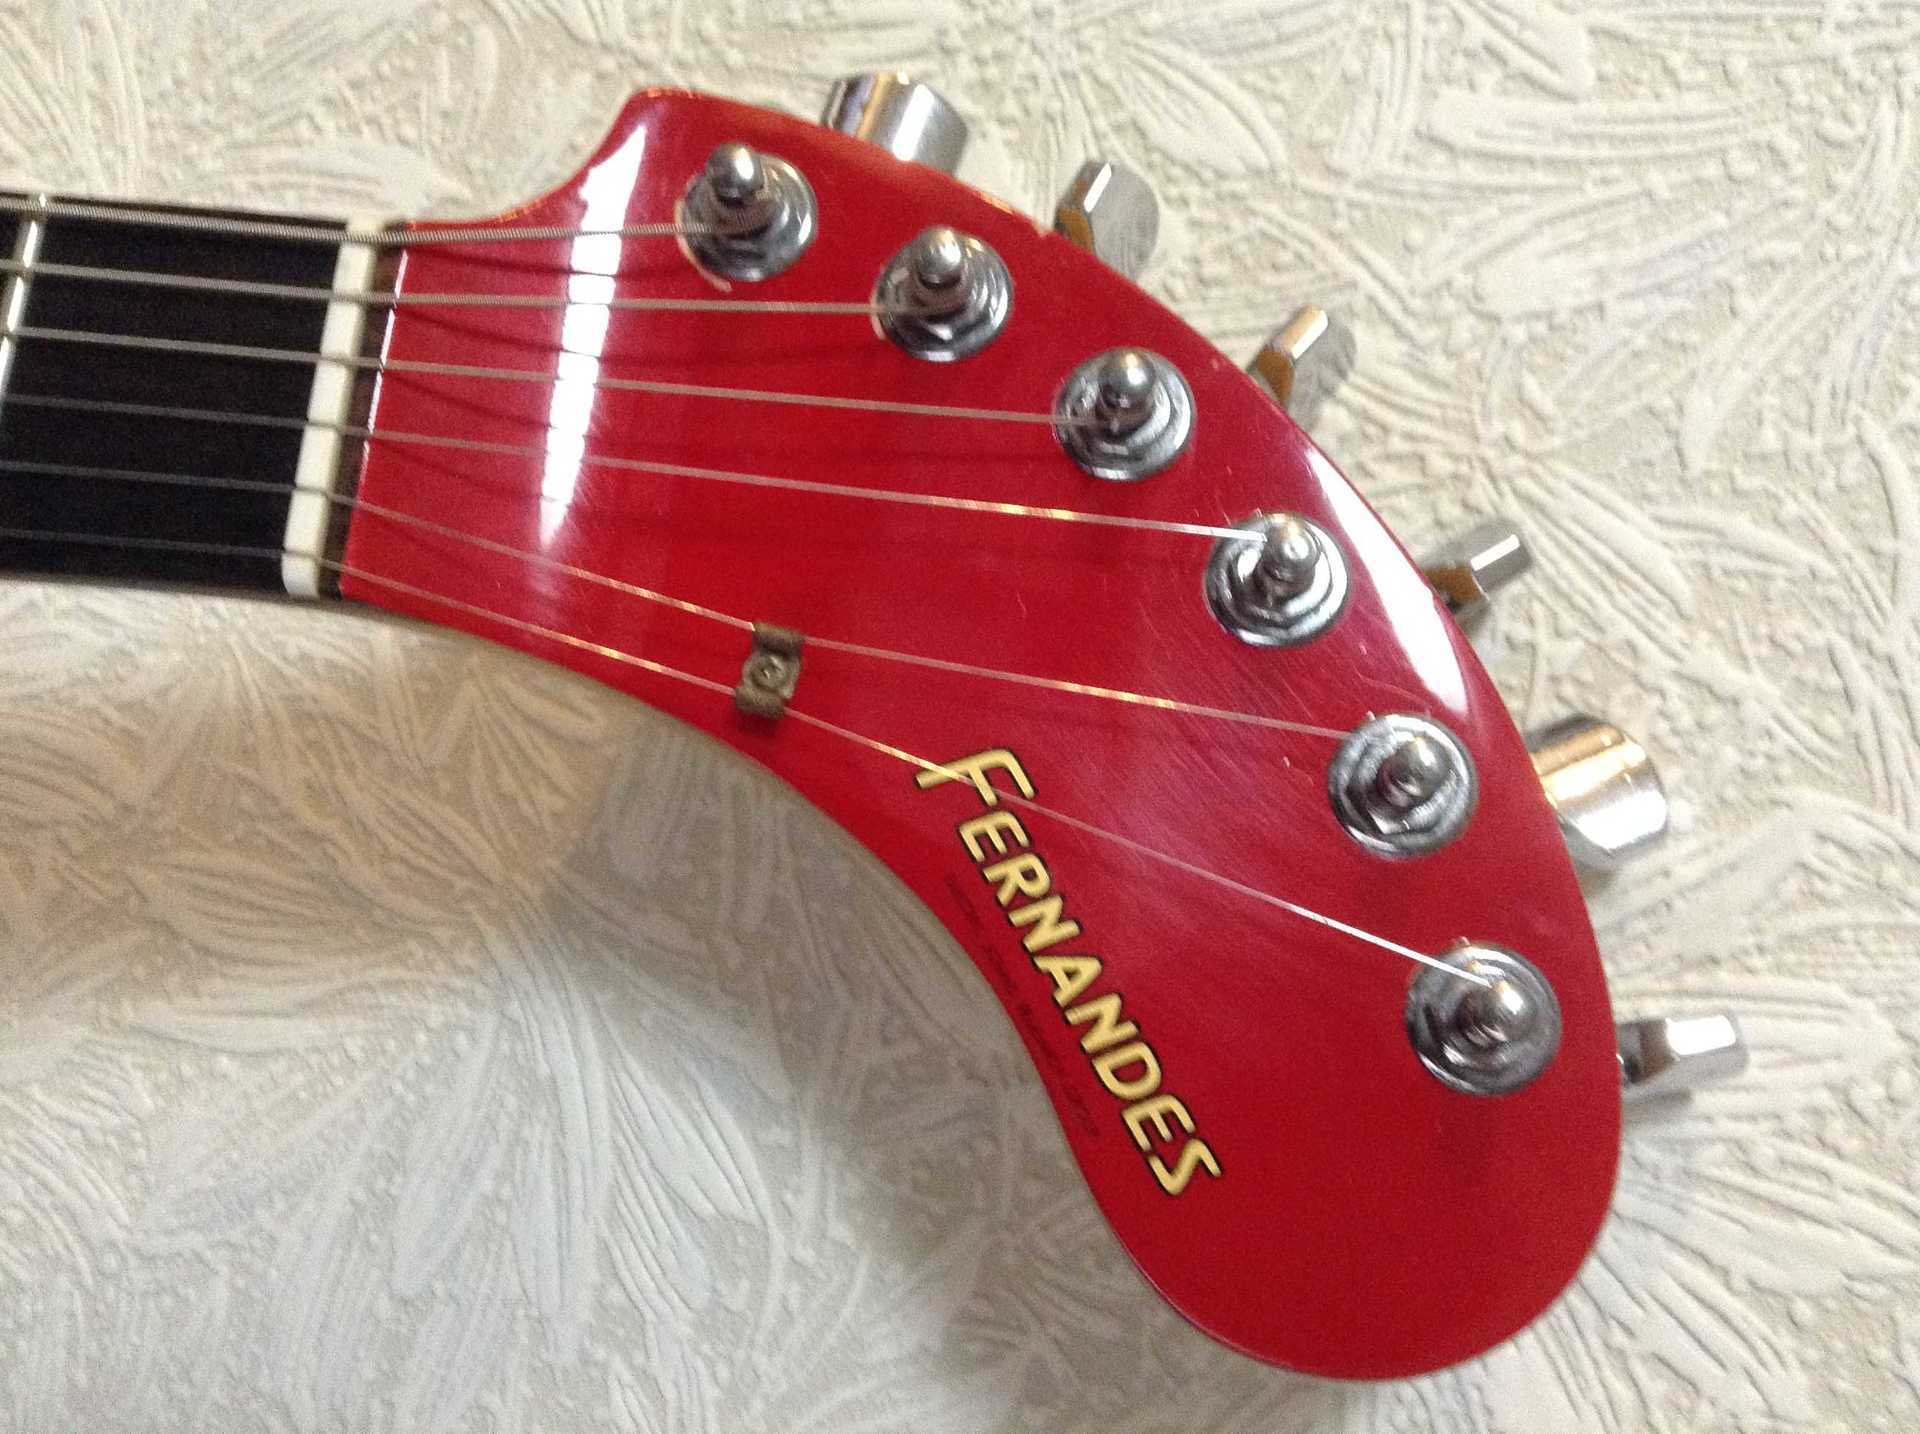 FERNANDES Zo-3 RED 1992or93？: 昔に比べりゃ 金も入るし・・・・